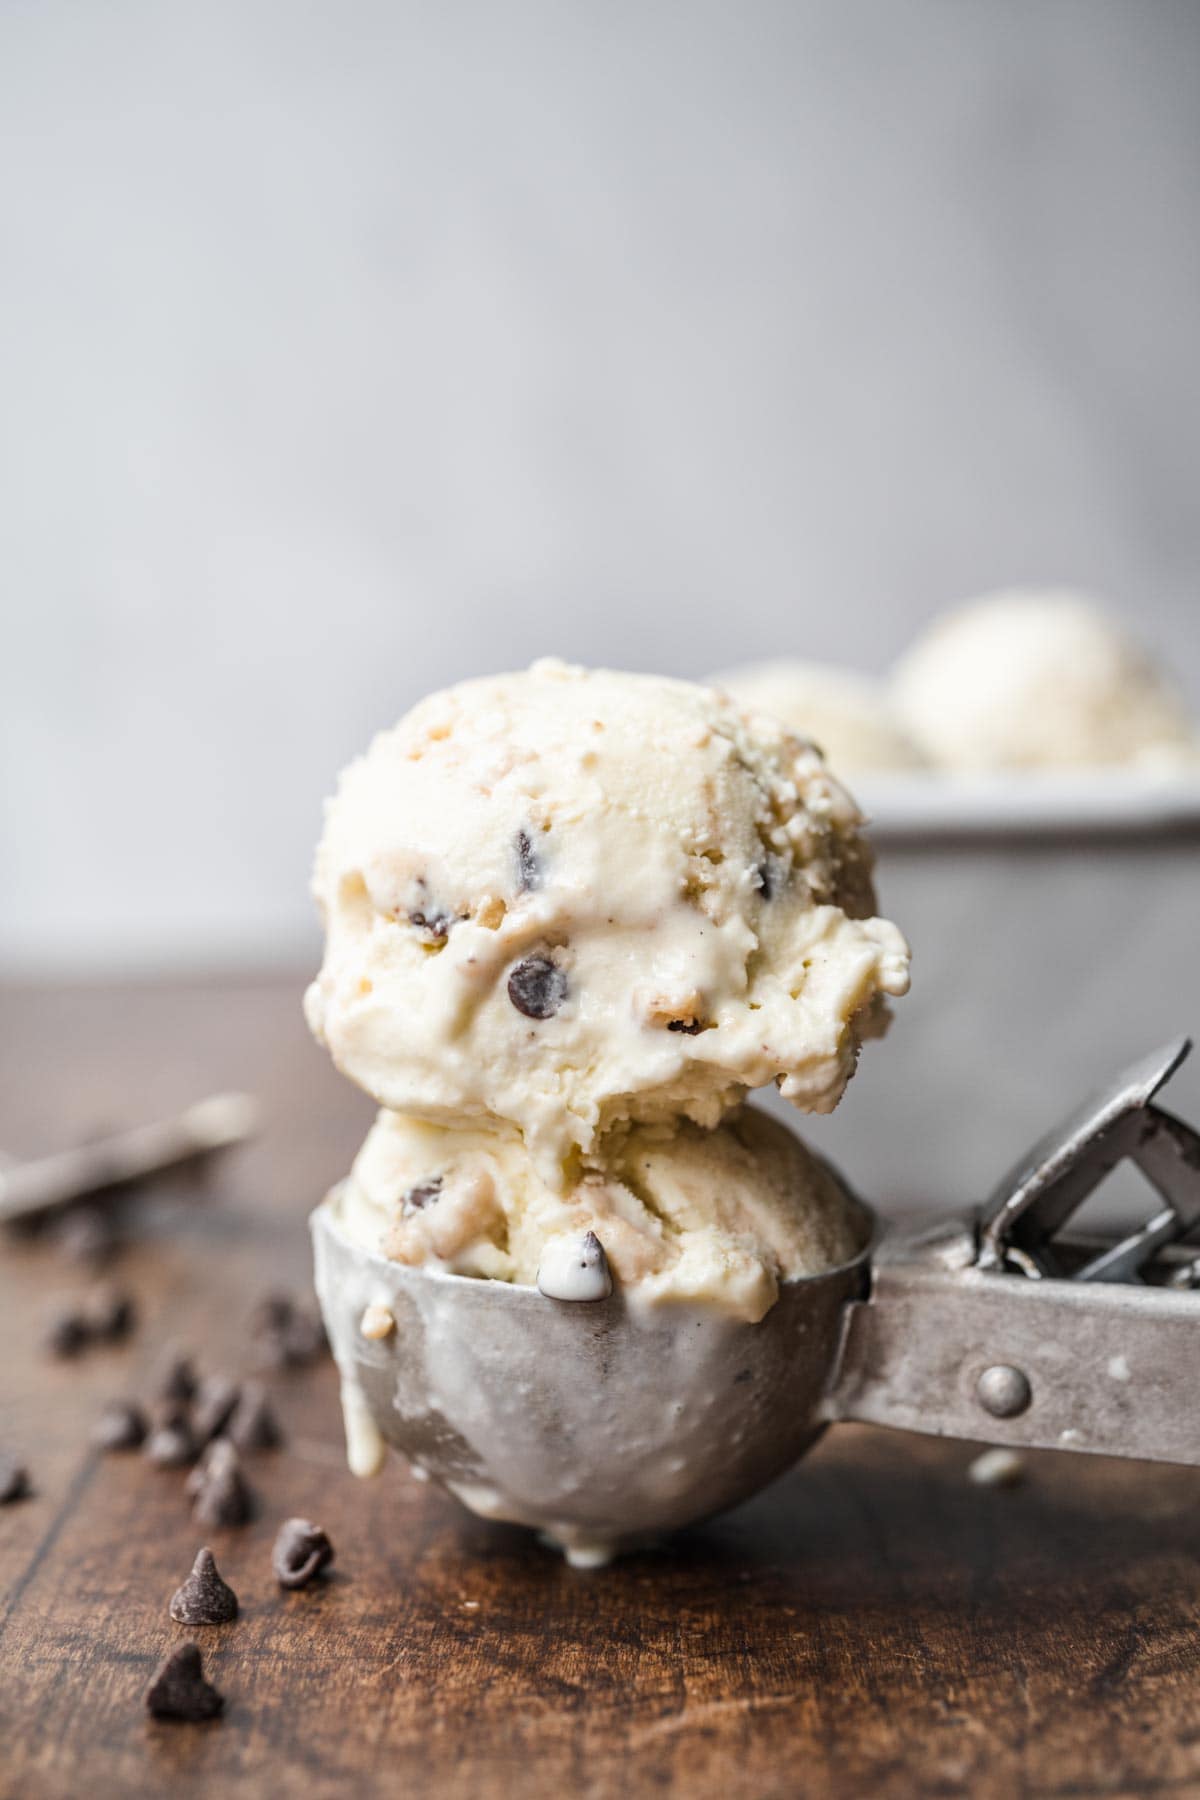 Chocolate Chip Cookie Dough Ice Cream scoops